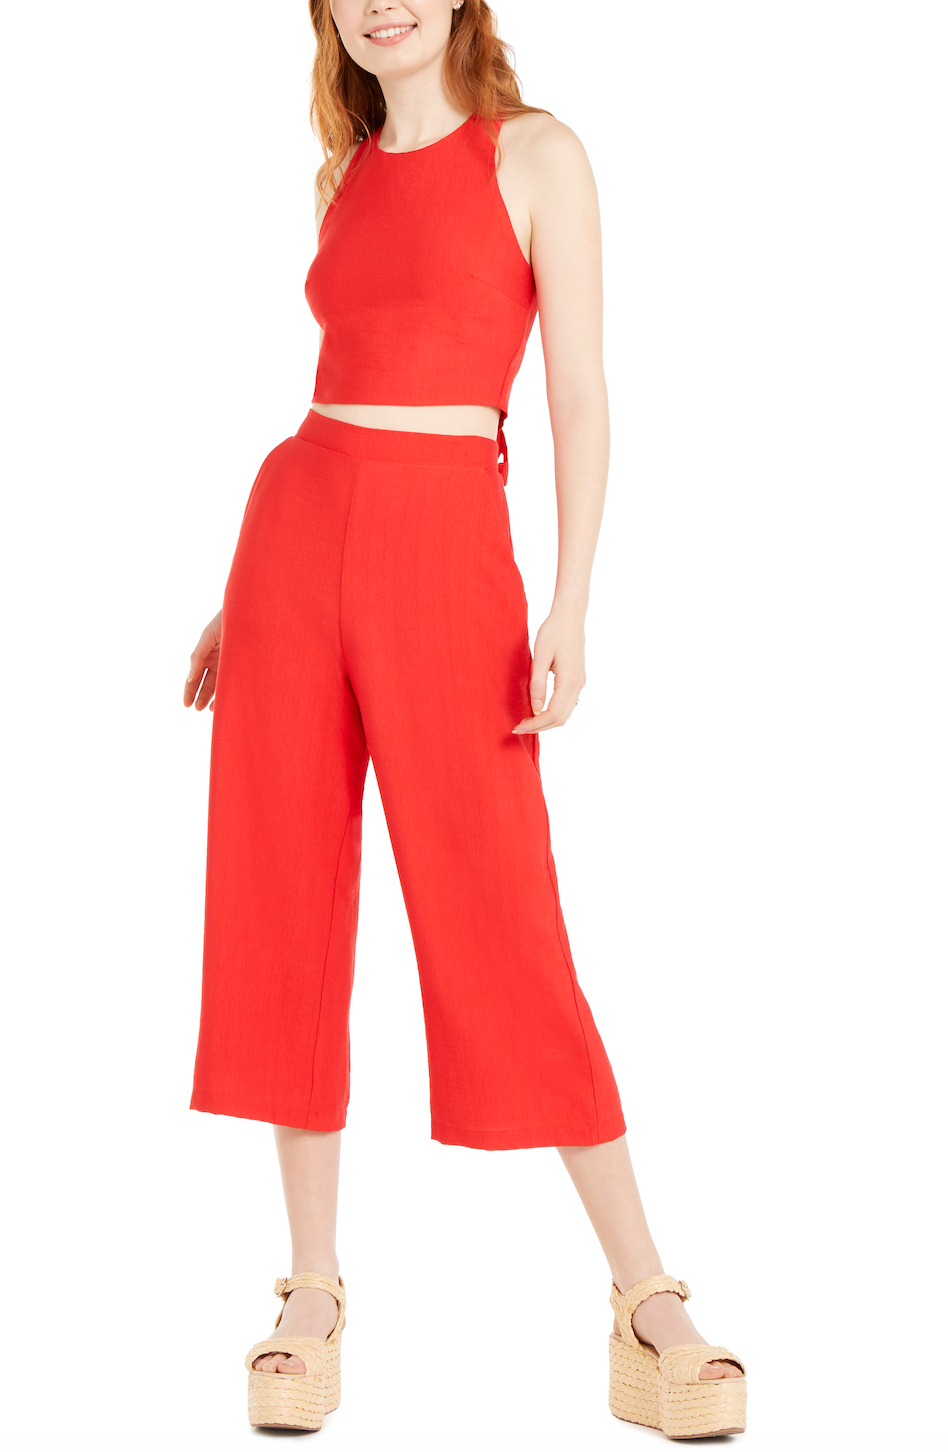 Description: JUNIORS' 2 PIECE BOW-BACK CROP TOP AND PANTS, Price: $24.84, Availability: Macy's stores and macys.com